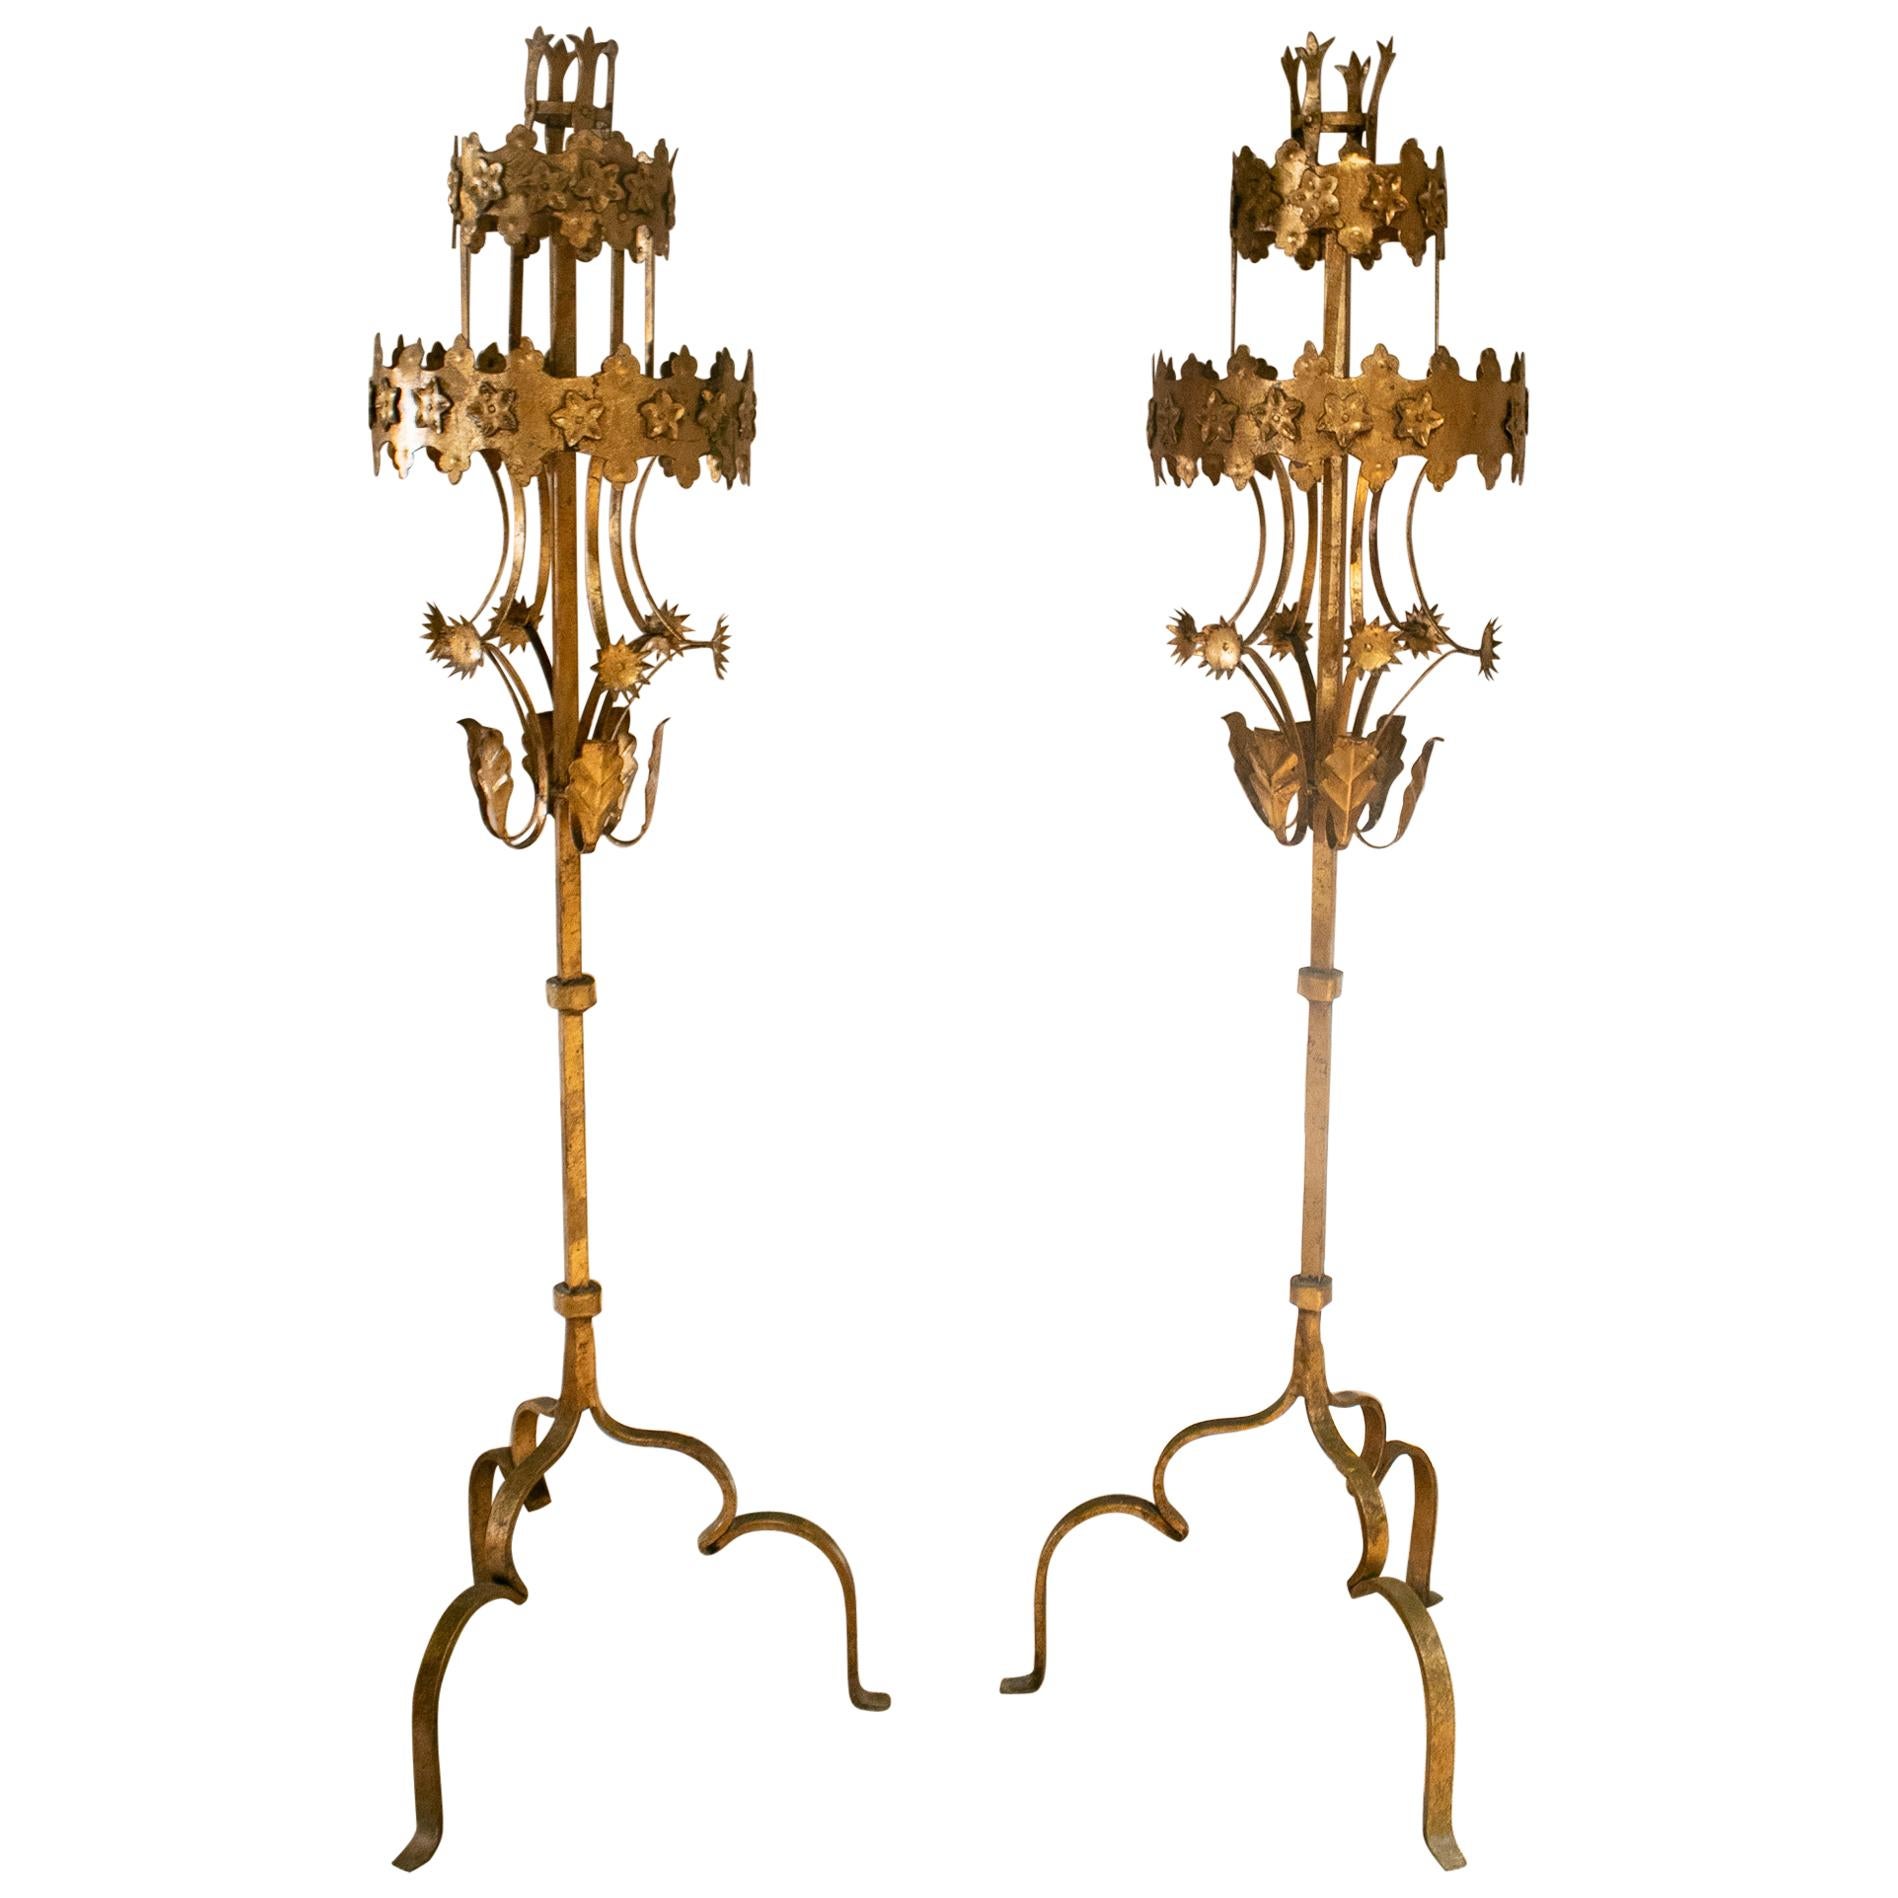 1990s Spanish Pair of Wrought Iron Two-Tier Tall Candle Stand